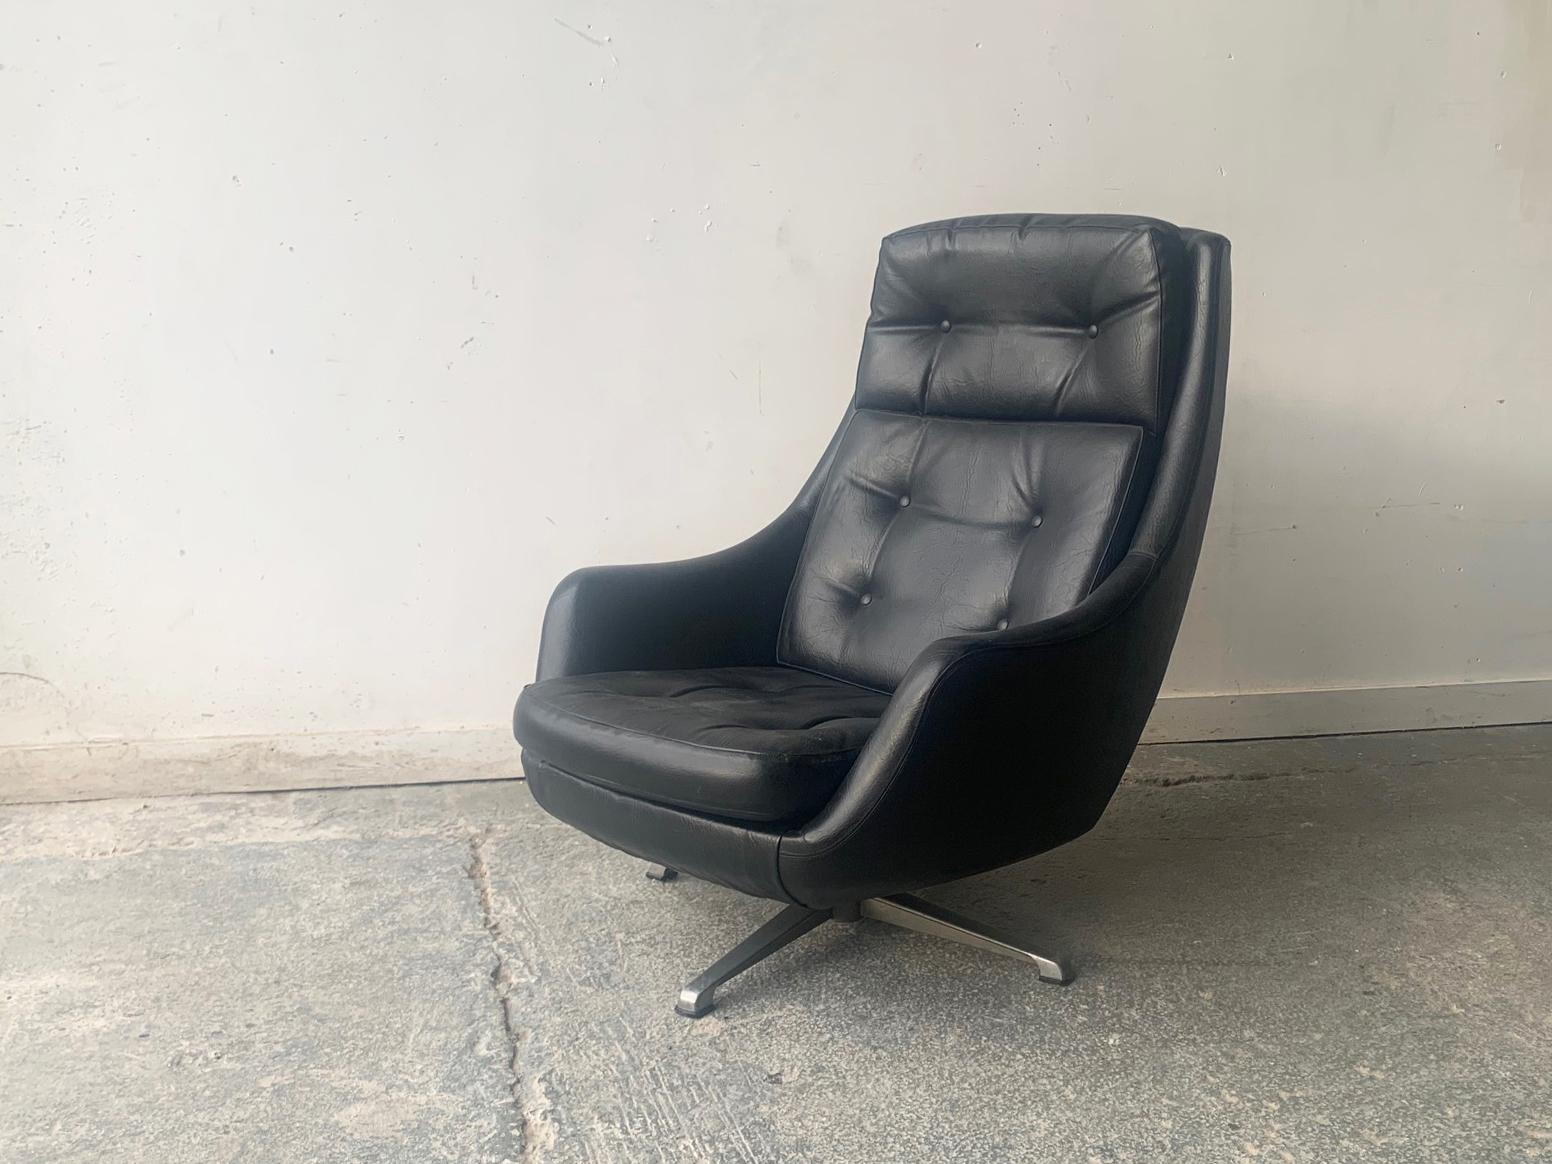 A 1970’s mid century high backed swivel lounge chair. Made by ‘ Kanari’ in the 1970’s. 3 separate cushions upholstered in the original black leatherette with button detailing.  Sits on 4 pronged steel splayed base with rubber tips. 

2 identical